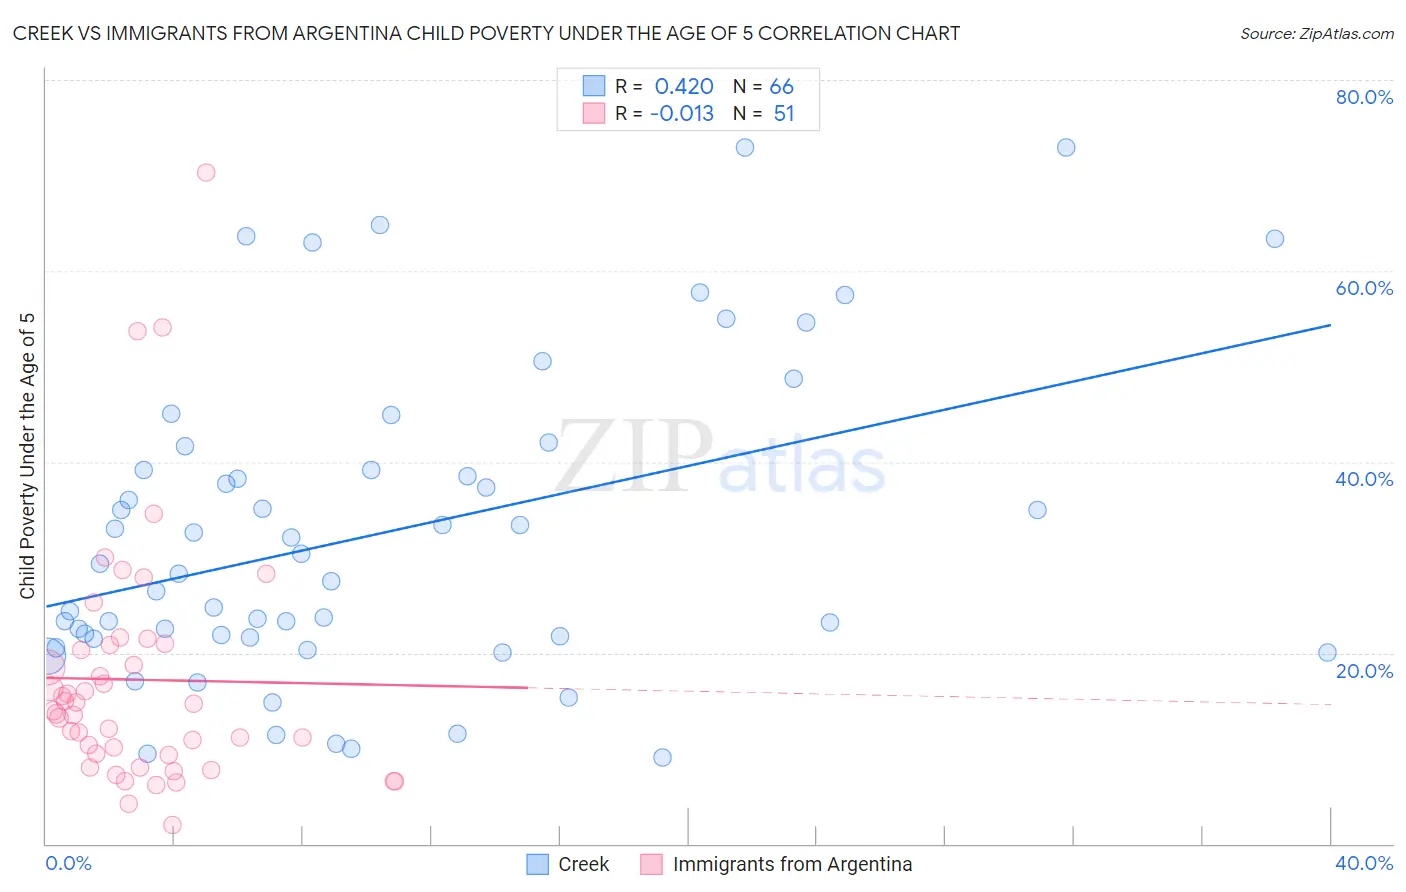 Creek vs Immigrants from Argentina Child Poverty Under the Age of 5